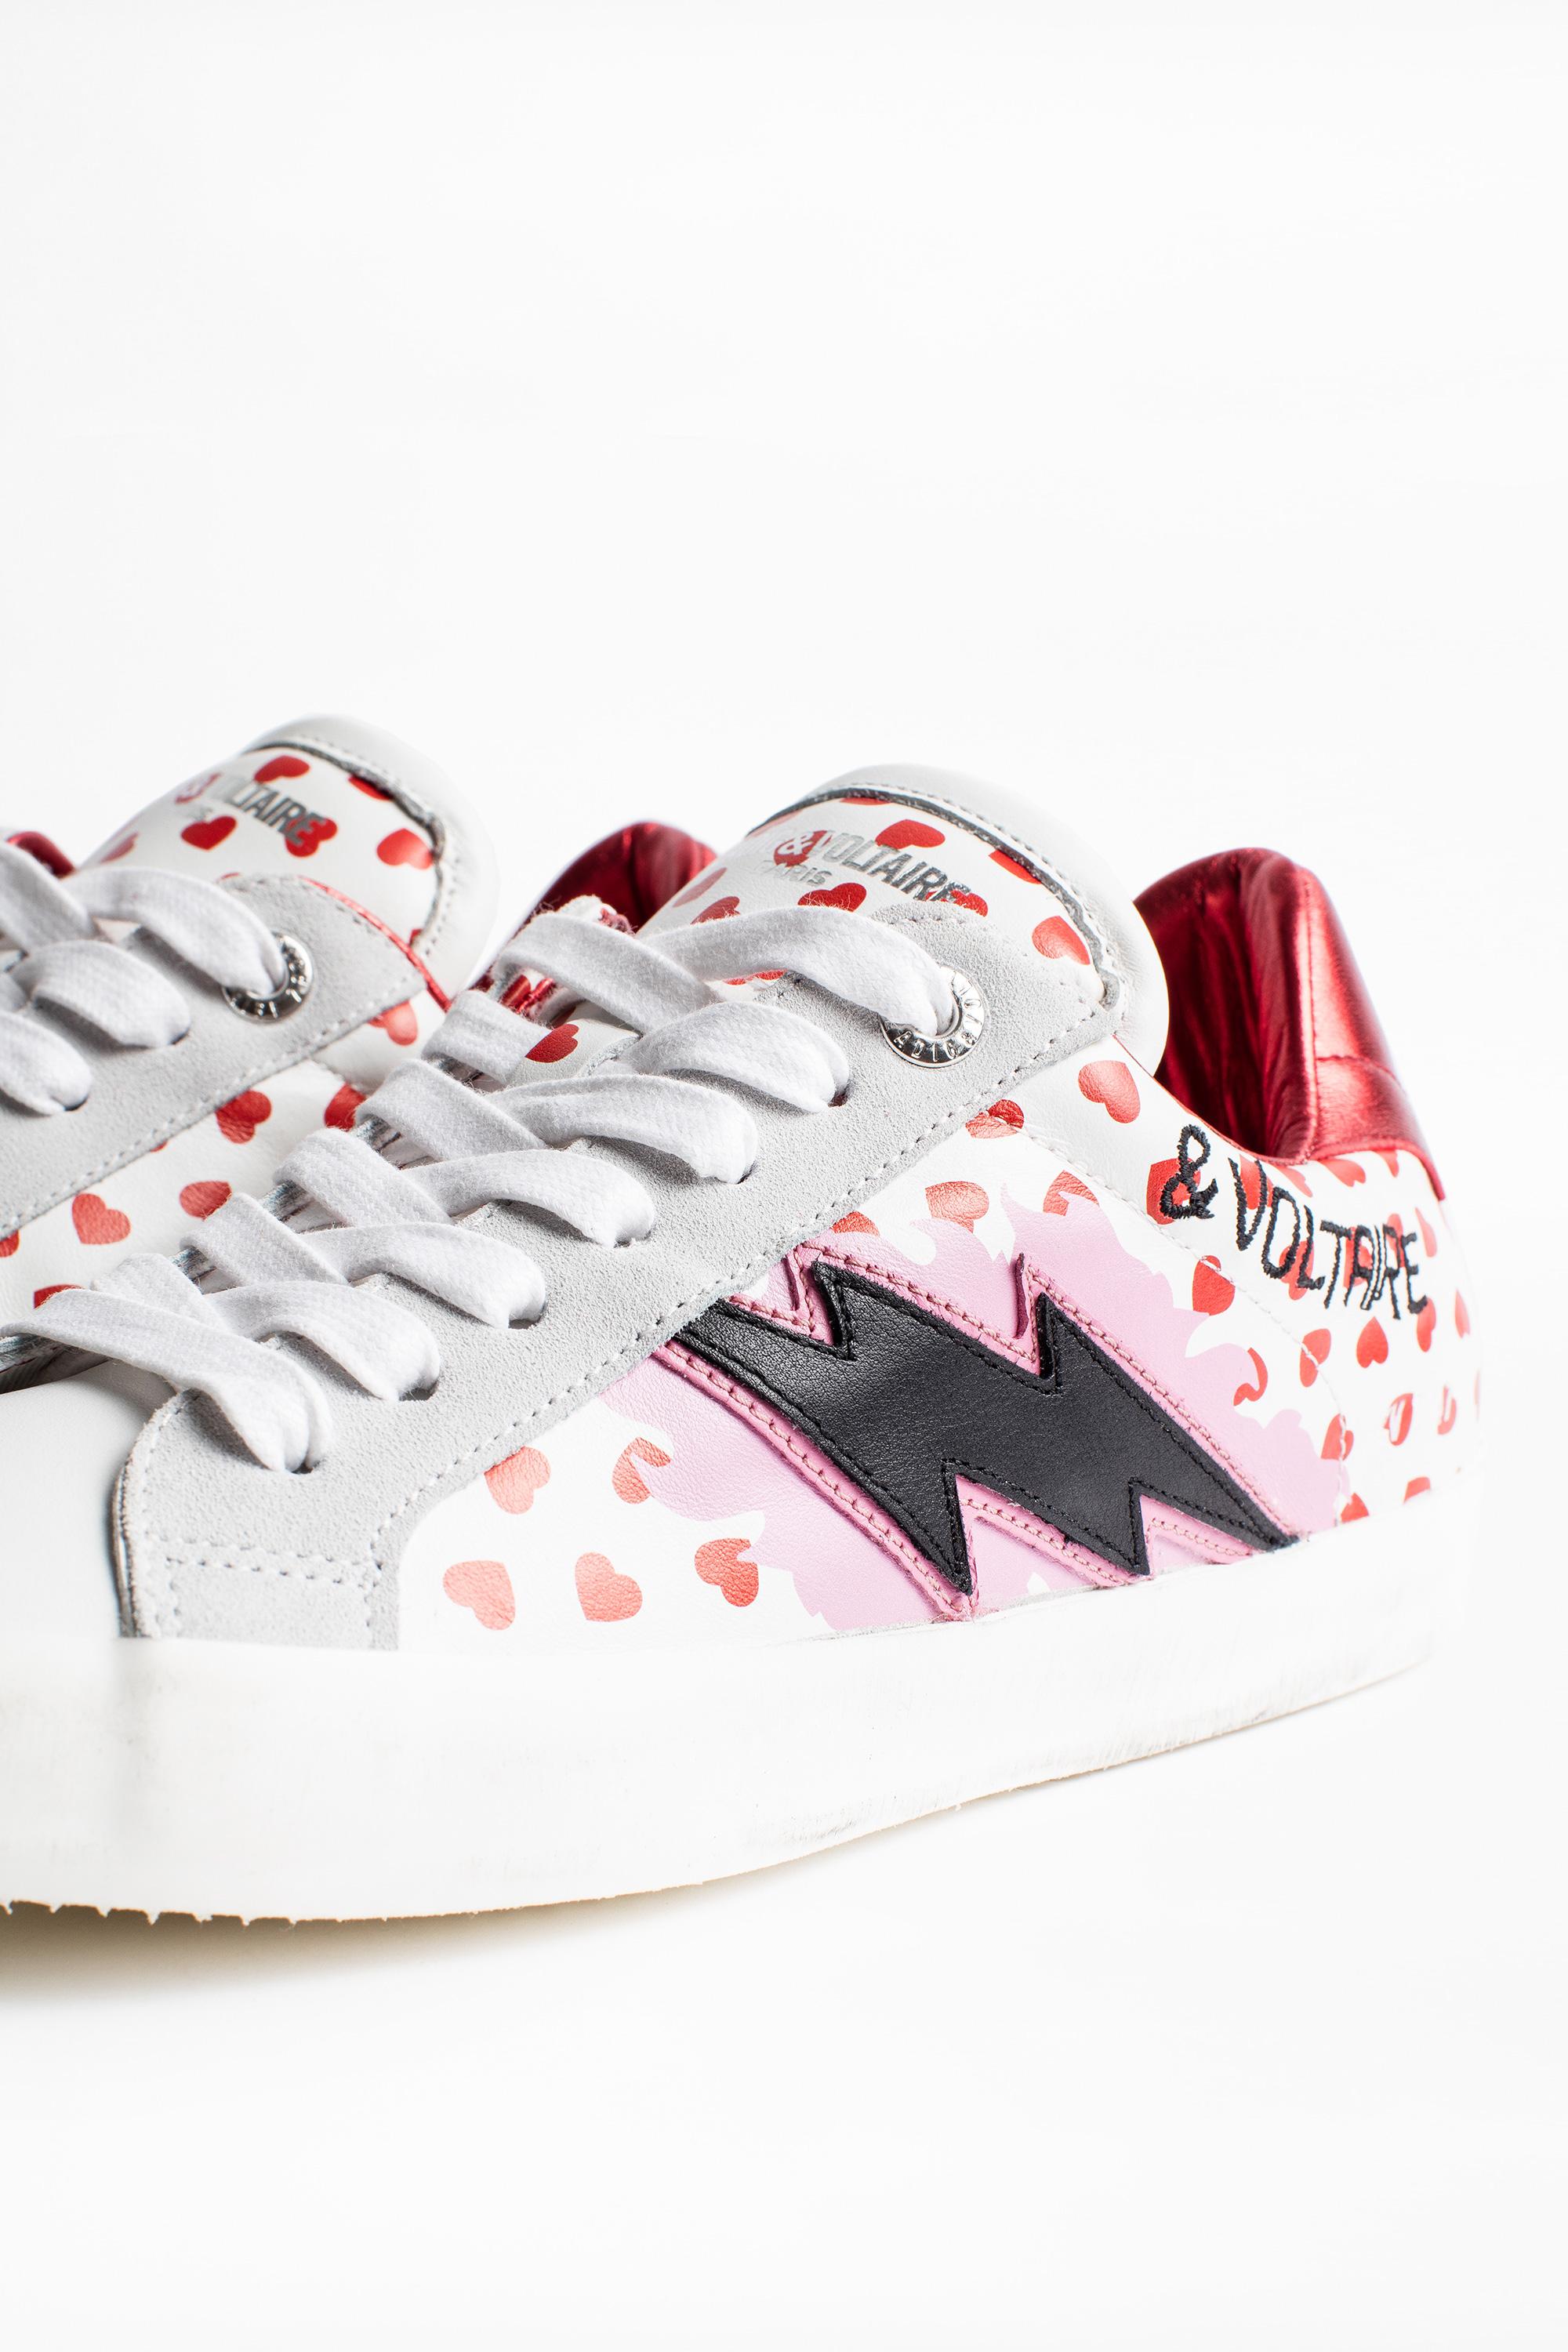 Zadig & Voltaire Leather Zadig Ao Cœur Sneakers in White/Red (White) - Lyst